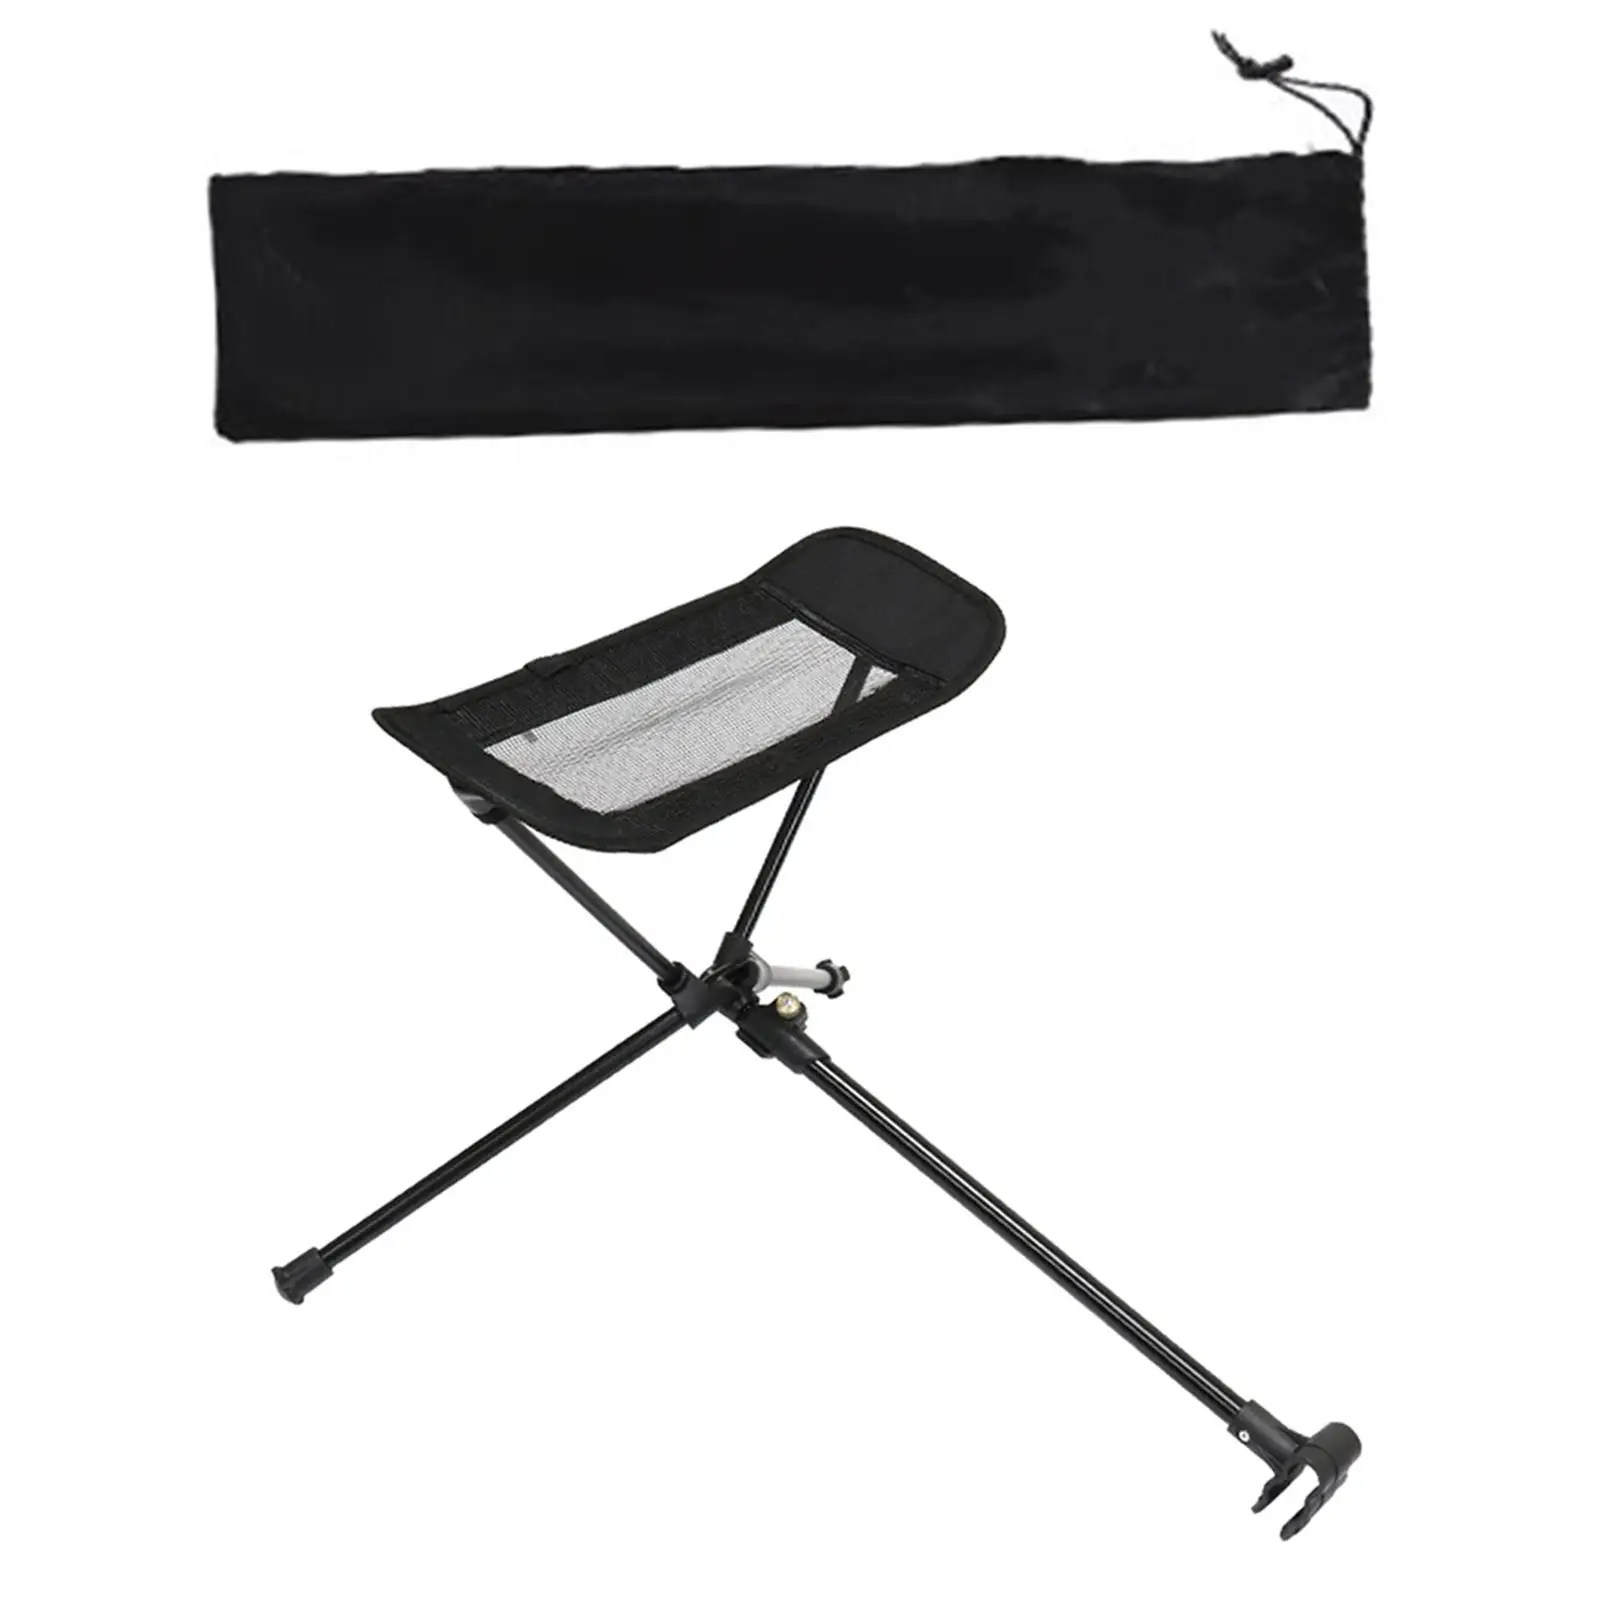 Folding Chair Footrest Retractable Adjustable Foot Stool for Picnic Camping Outdoor